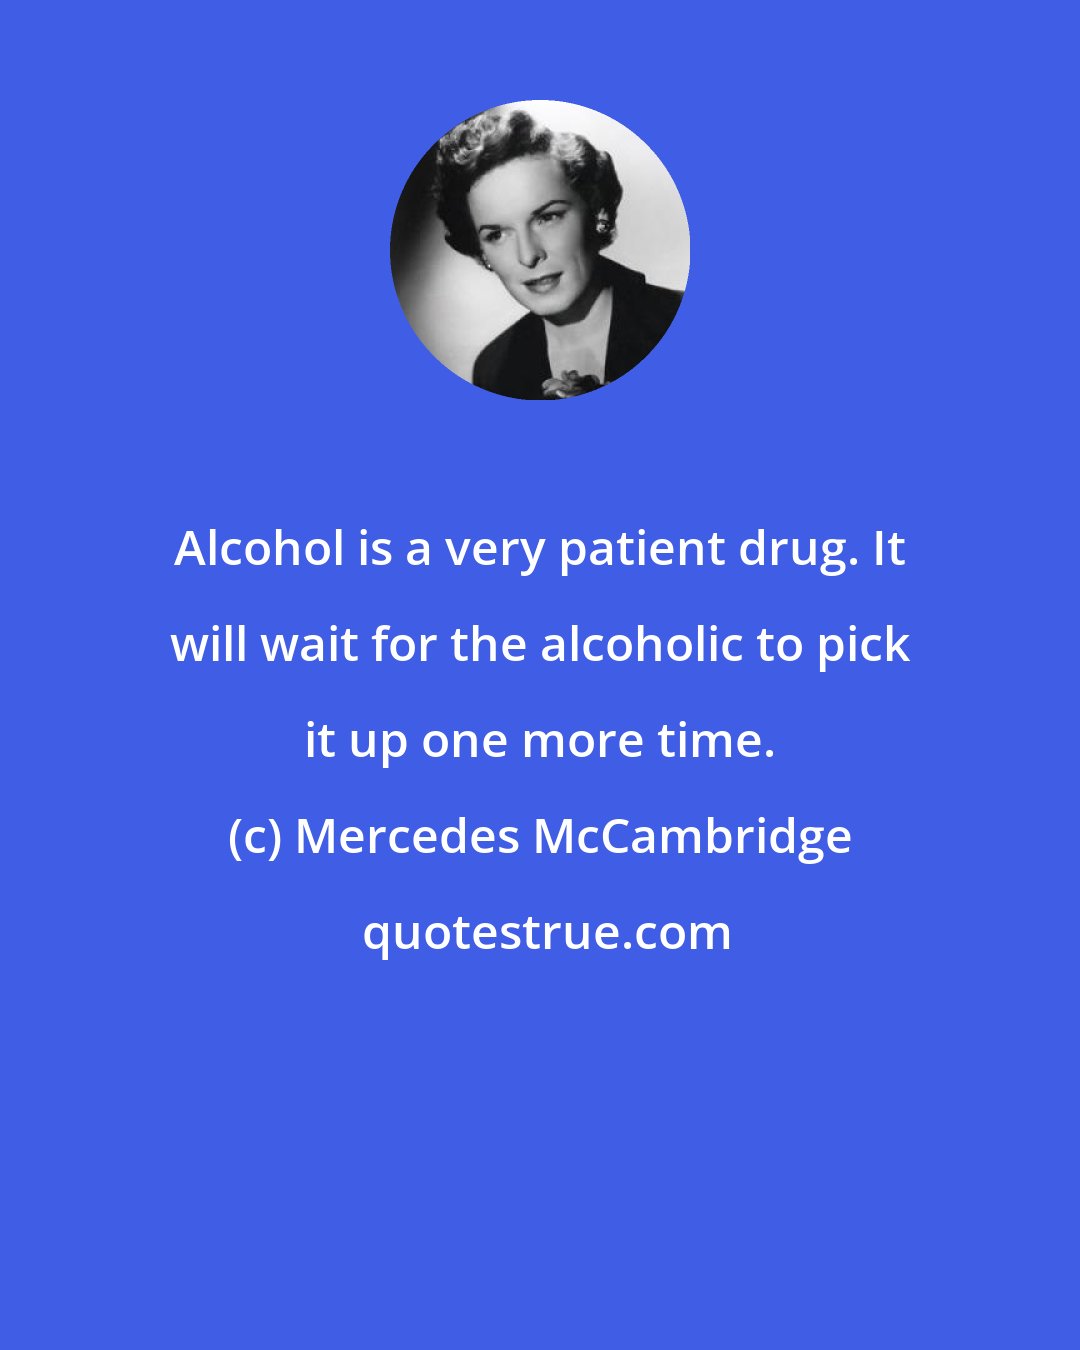 Mercedes McCambridge: Alcohol is a very patient drug. It will wait for the alcoholic to pick it up one more time.